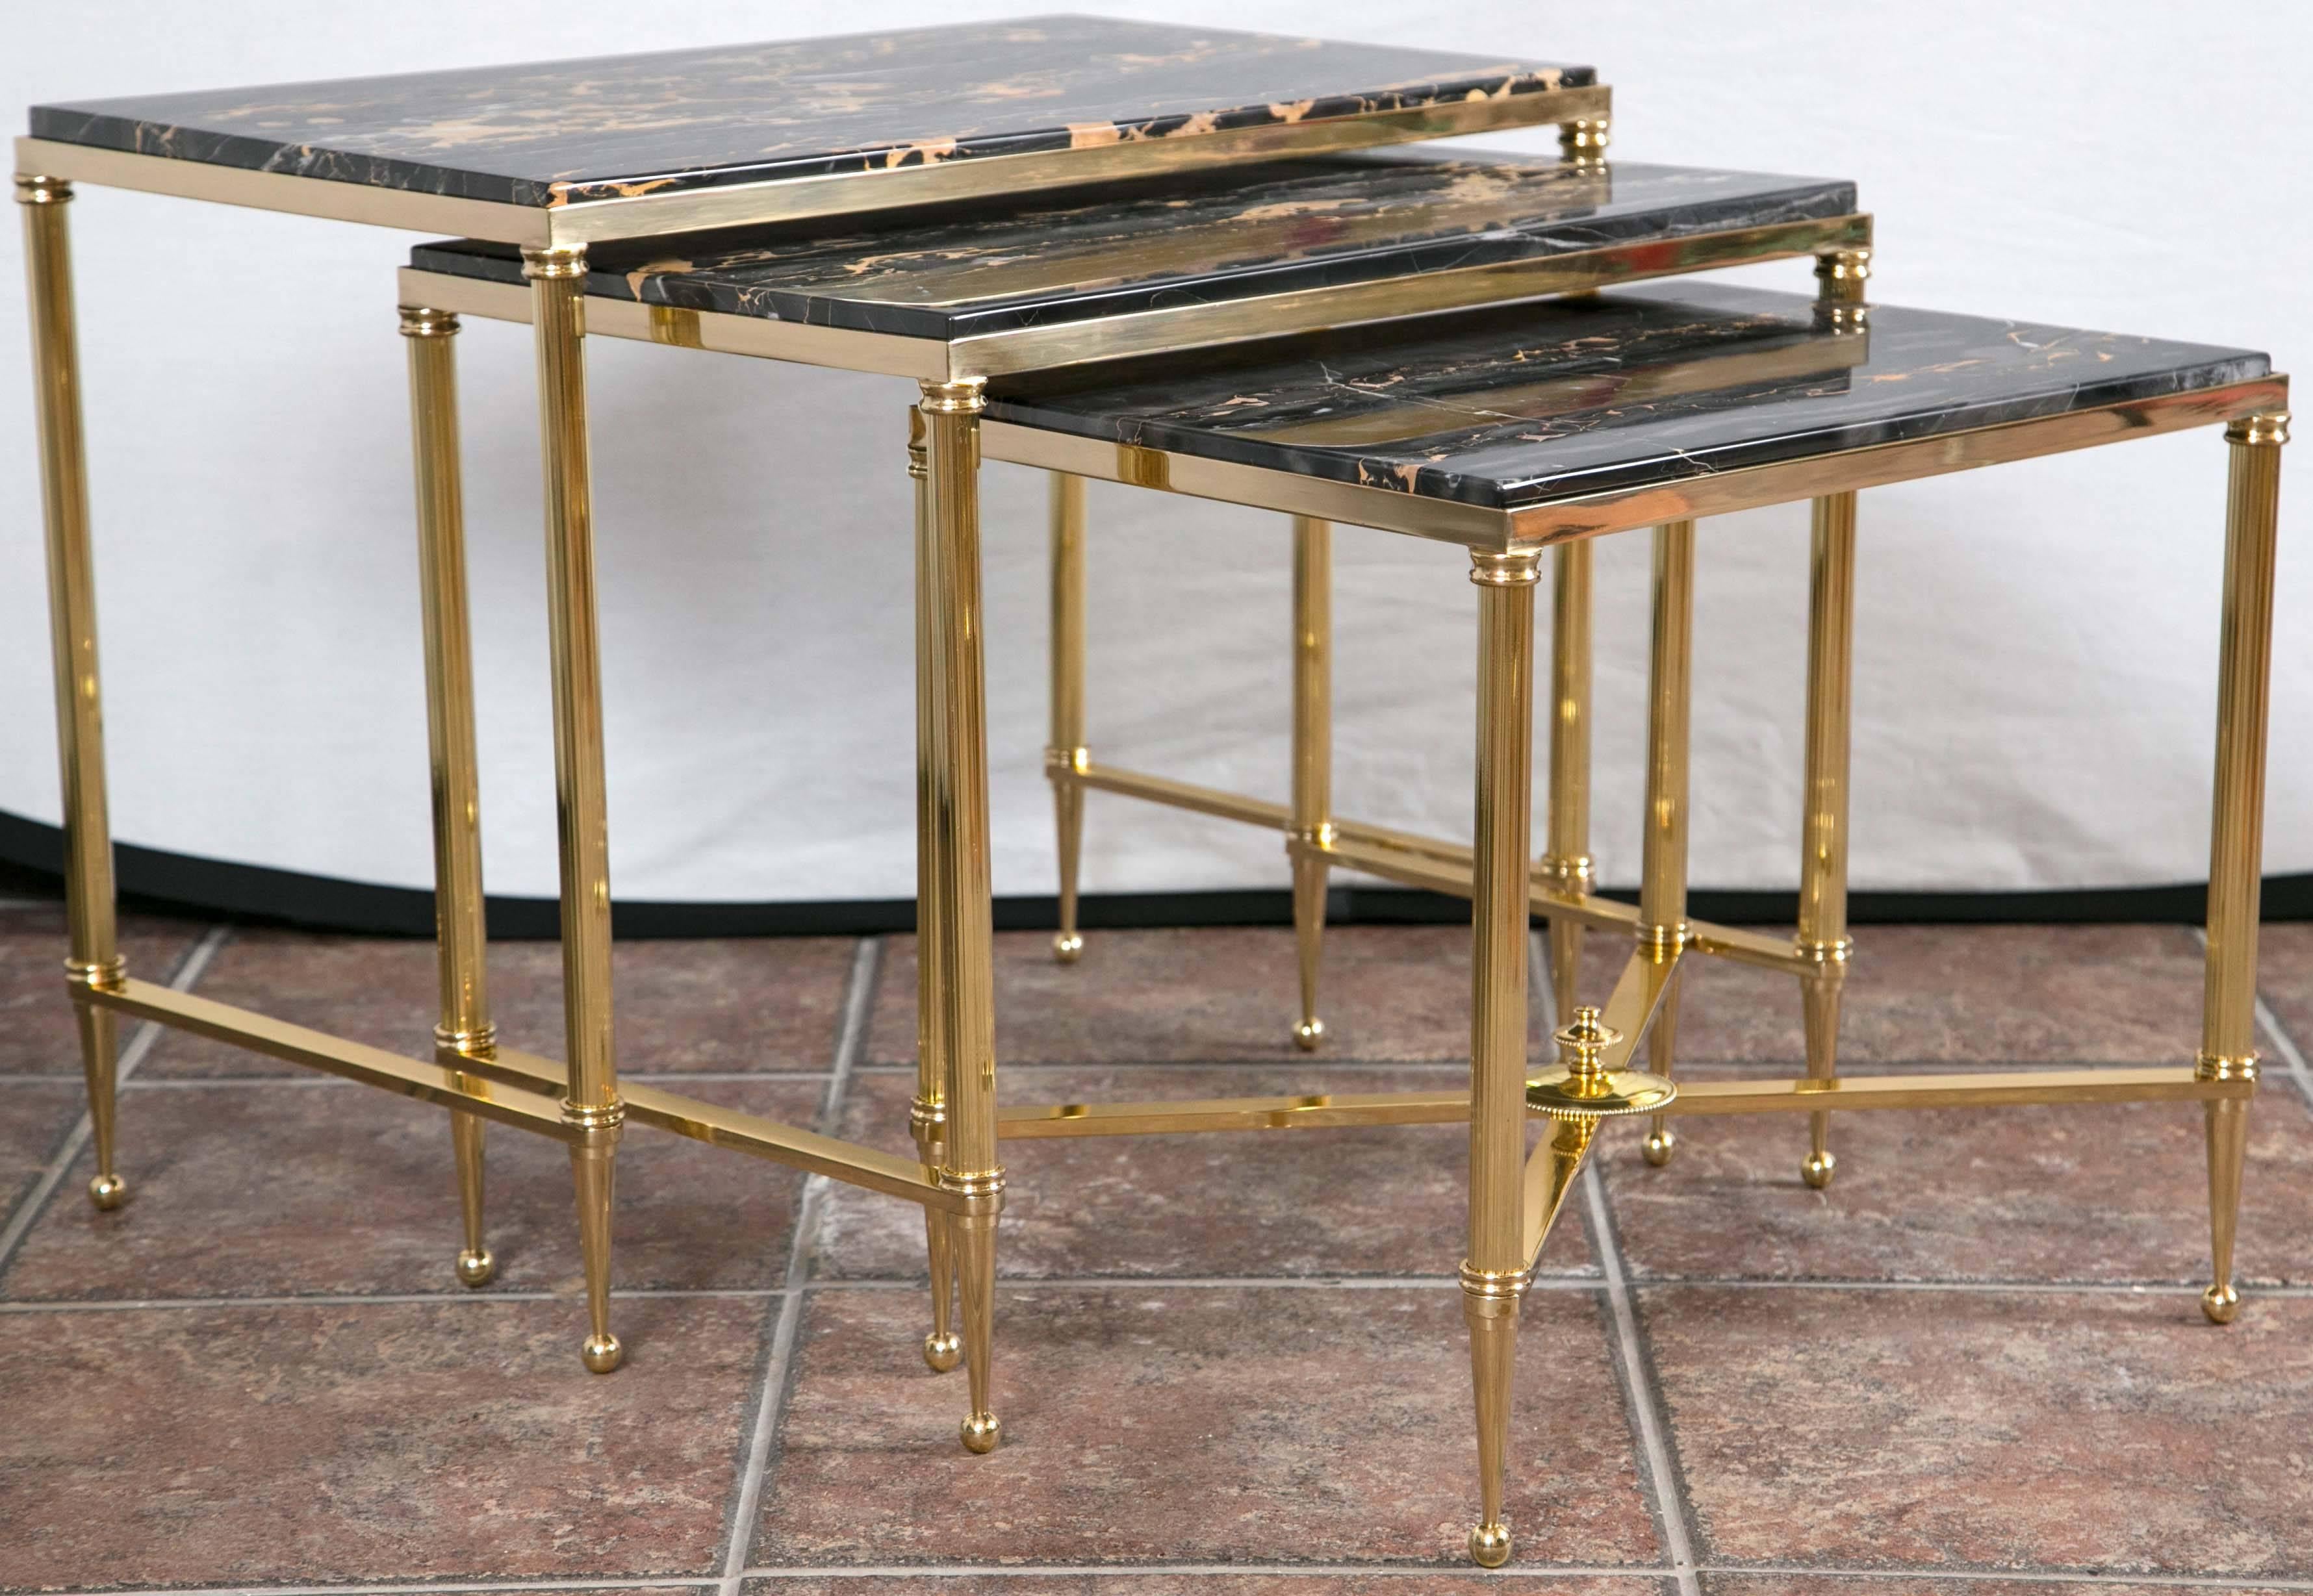 Set of three bronze Mid-Century Modern nesting tables having inset black/brown marble tops supported on reeded columns and tapered feet.